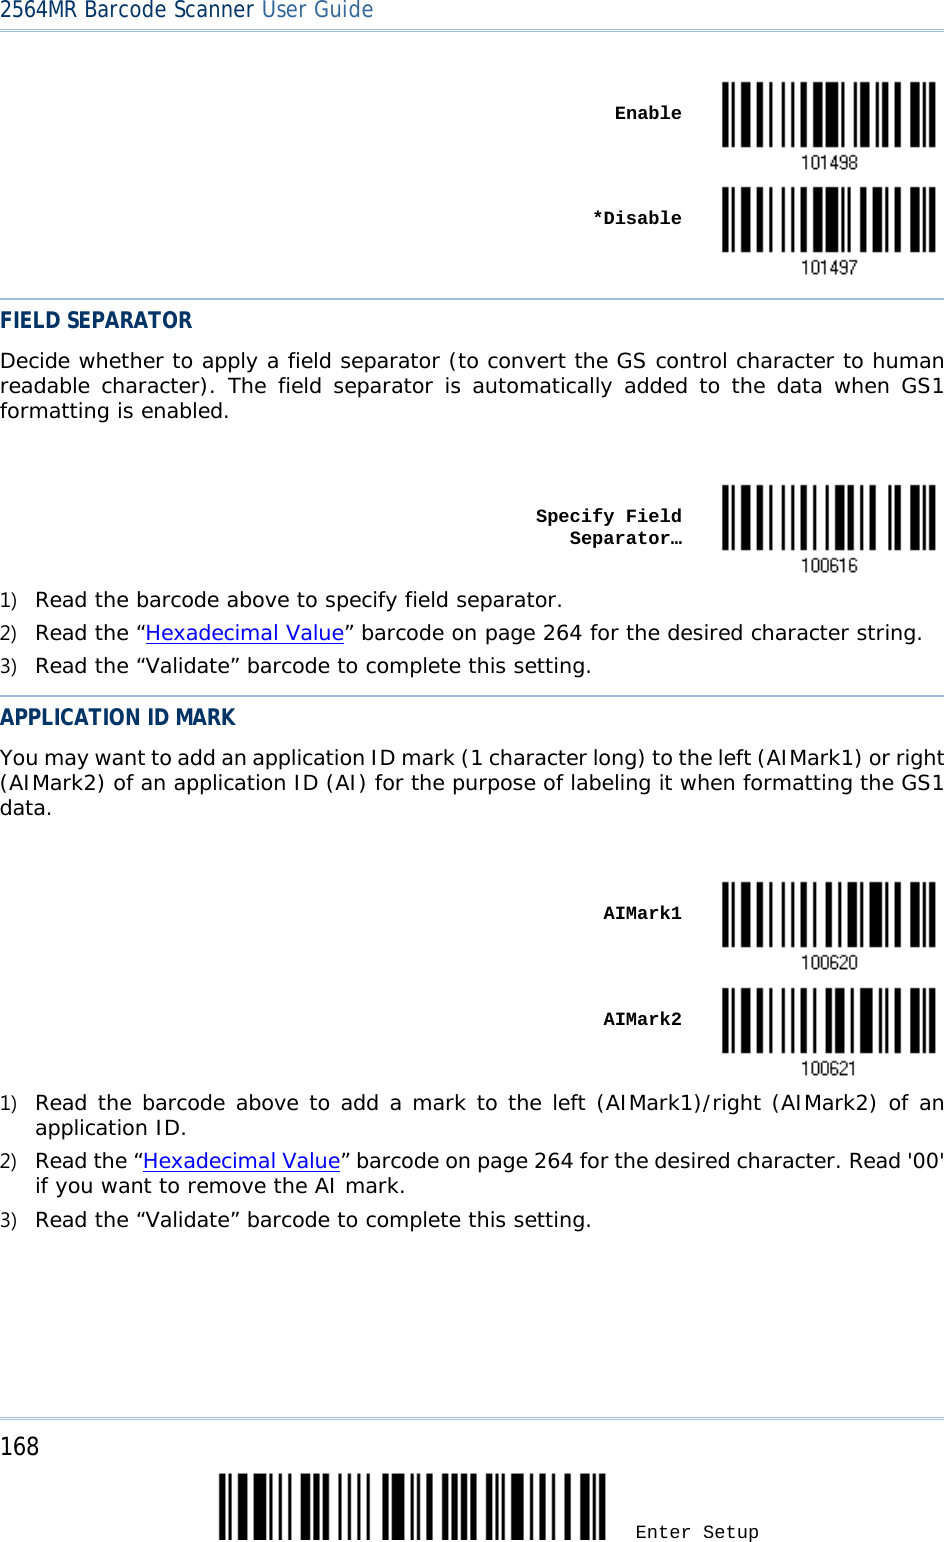 2564MR Barcode Scanner User Guide     Enable     *Disable  FIELD SEPARATOR Decide whether to apply a field separator (to convert the GS control character to human readable character). The field separator is automatically added to the data when GS1 formatting is enabled.     Specify Field Separator…  1) Read the barcode above to specify field separator. 2) Read the “Hexadecimal Value” barcode on page 264 for the desired character string. 3) Read the “Validate” barcode to complete this setting. APPLICATION ID MARK You may want to add an application ID mark (1 character long) to the left (AIMark1) or right (AIMark2) of an application ID (AI) for the purpose of labeling it when formatting the GS1 data.     AIMark1     AIMark2  1) Read the barcode above to add a mark to the left (AIMark1)/right (AIMark2) of an application ID. 2) Read the “Hexadecimal Value” barcode on page 264 for the desired character. Read &apos;00&apos; if you want to remove the AI mark. 3) Read the “Validate” barcode to complete this setting. 168 Enter Setup 